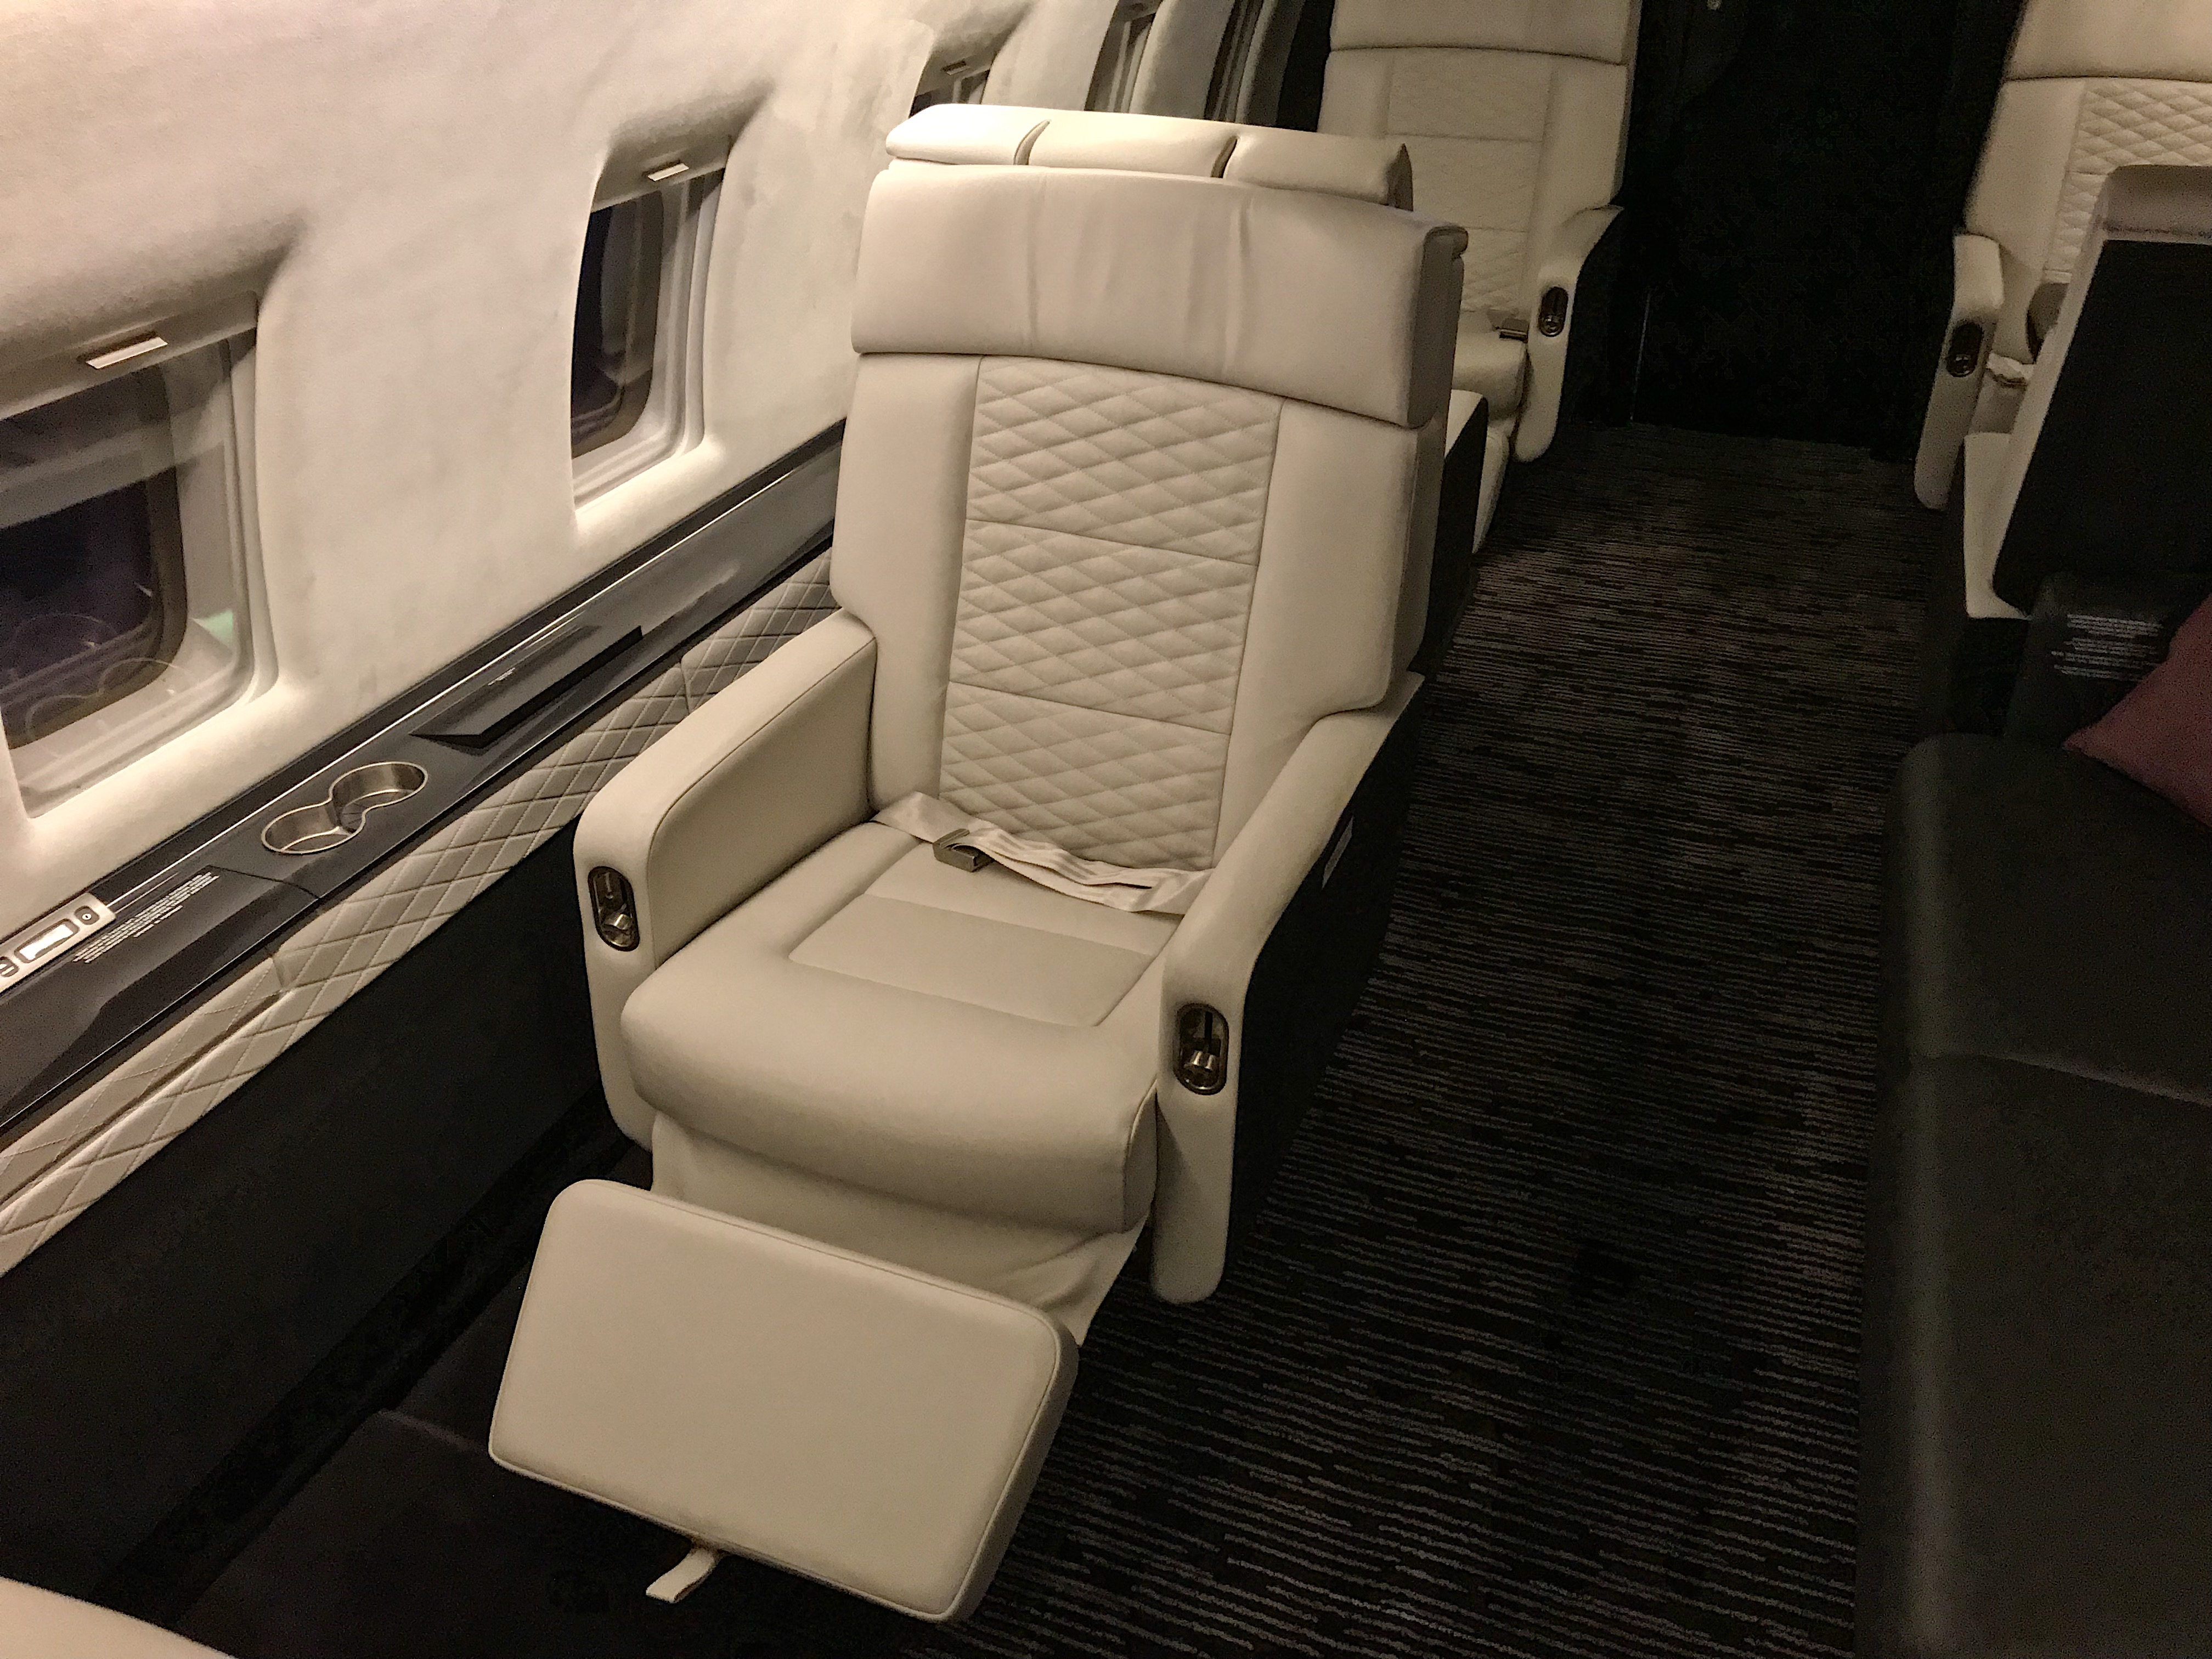 a white leather chair in a plane